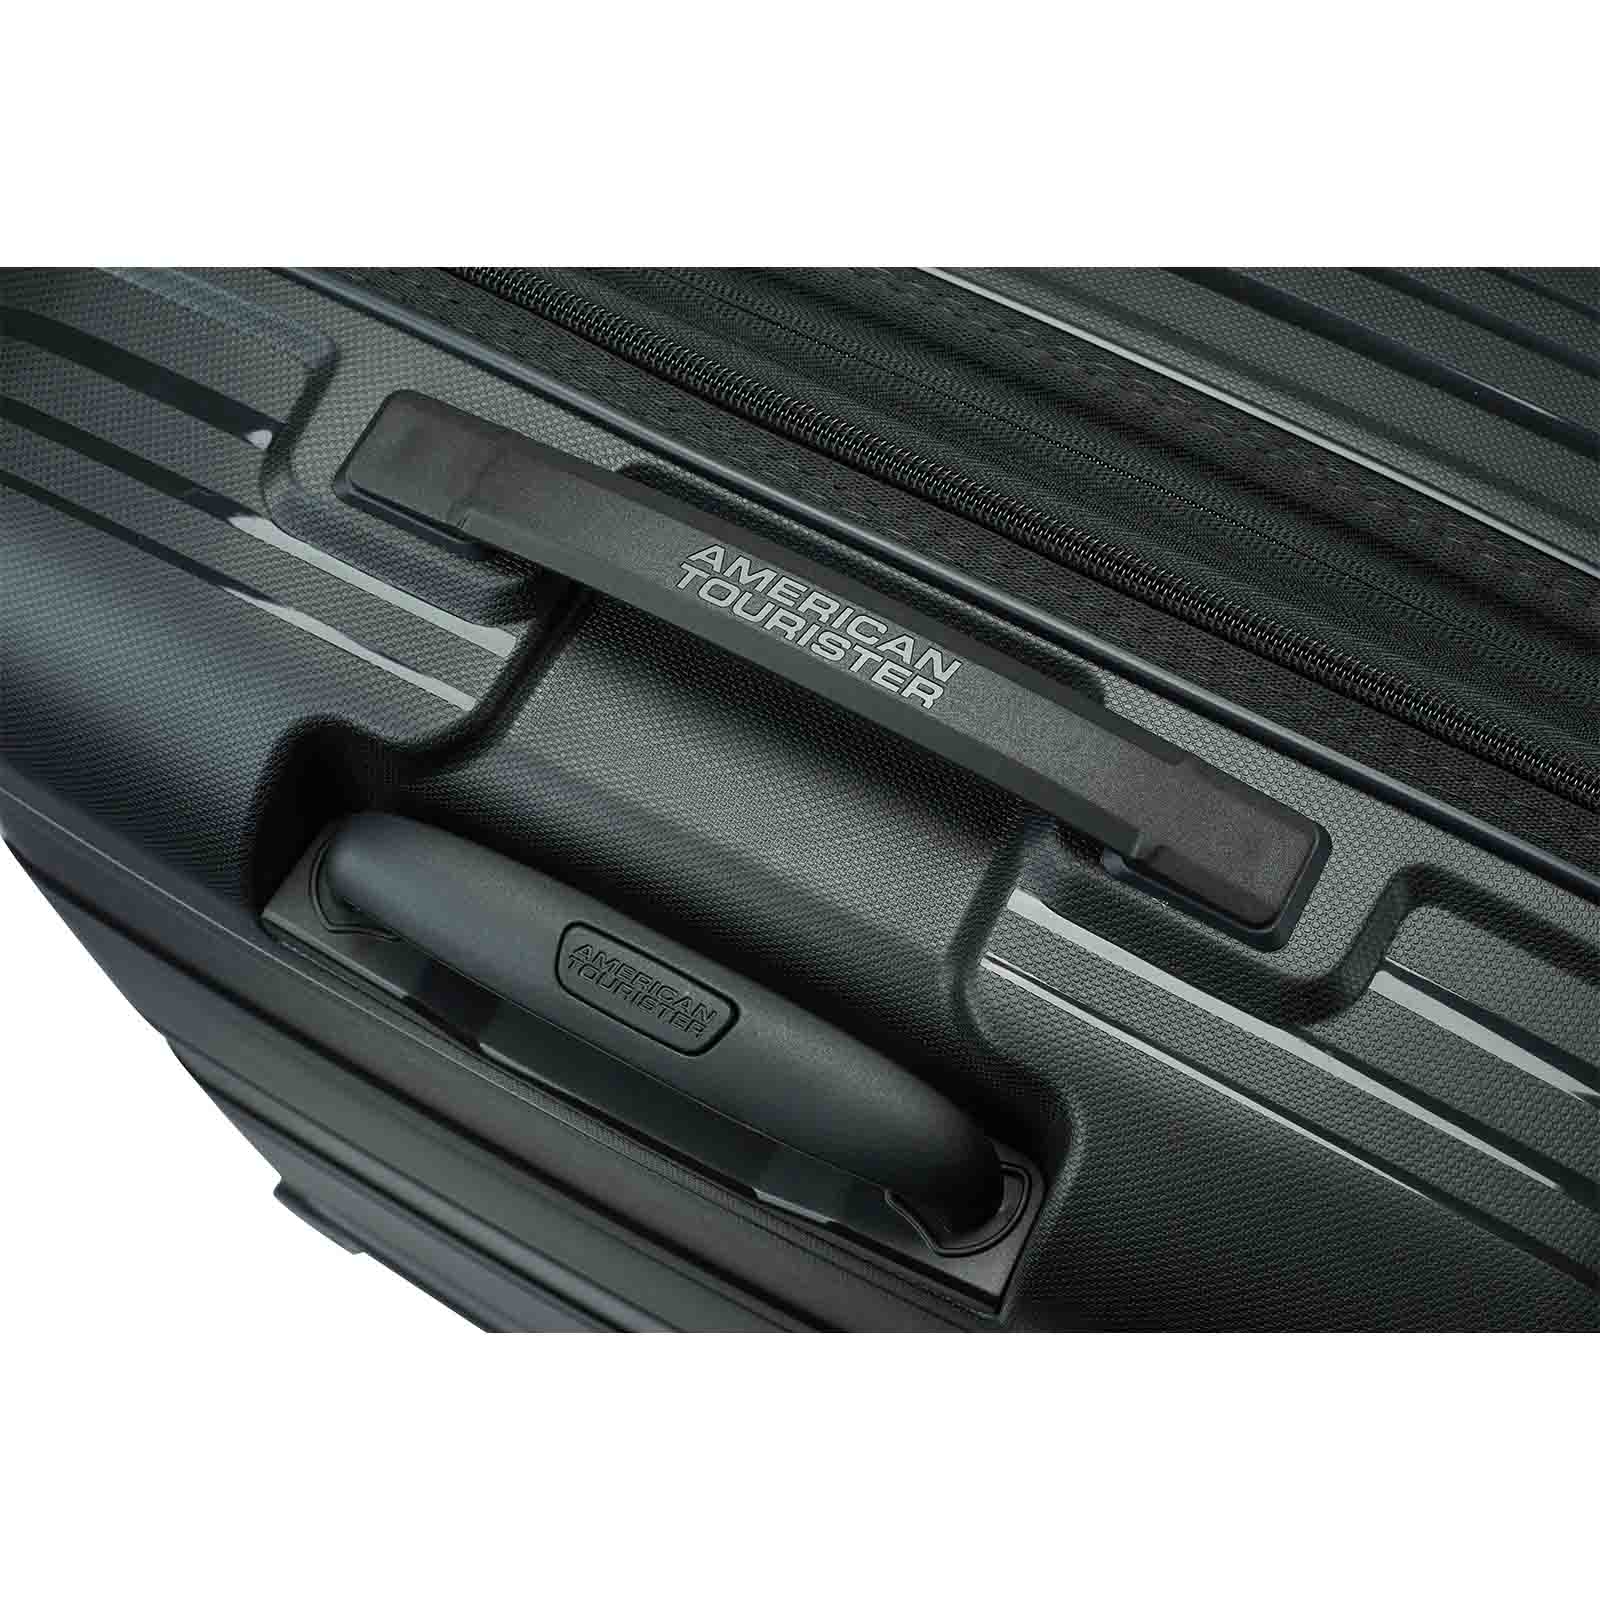 American-Tourister-Light-Max-82cm-Suitcase-Black-Trolley